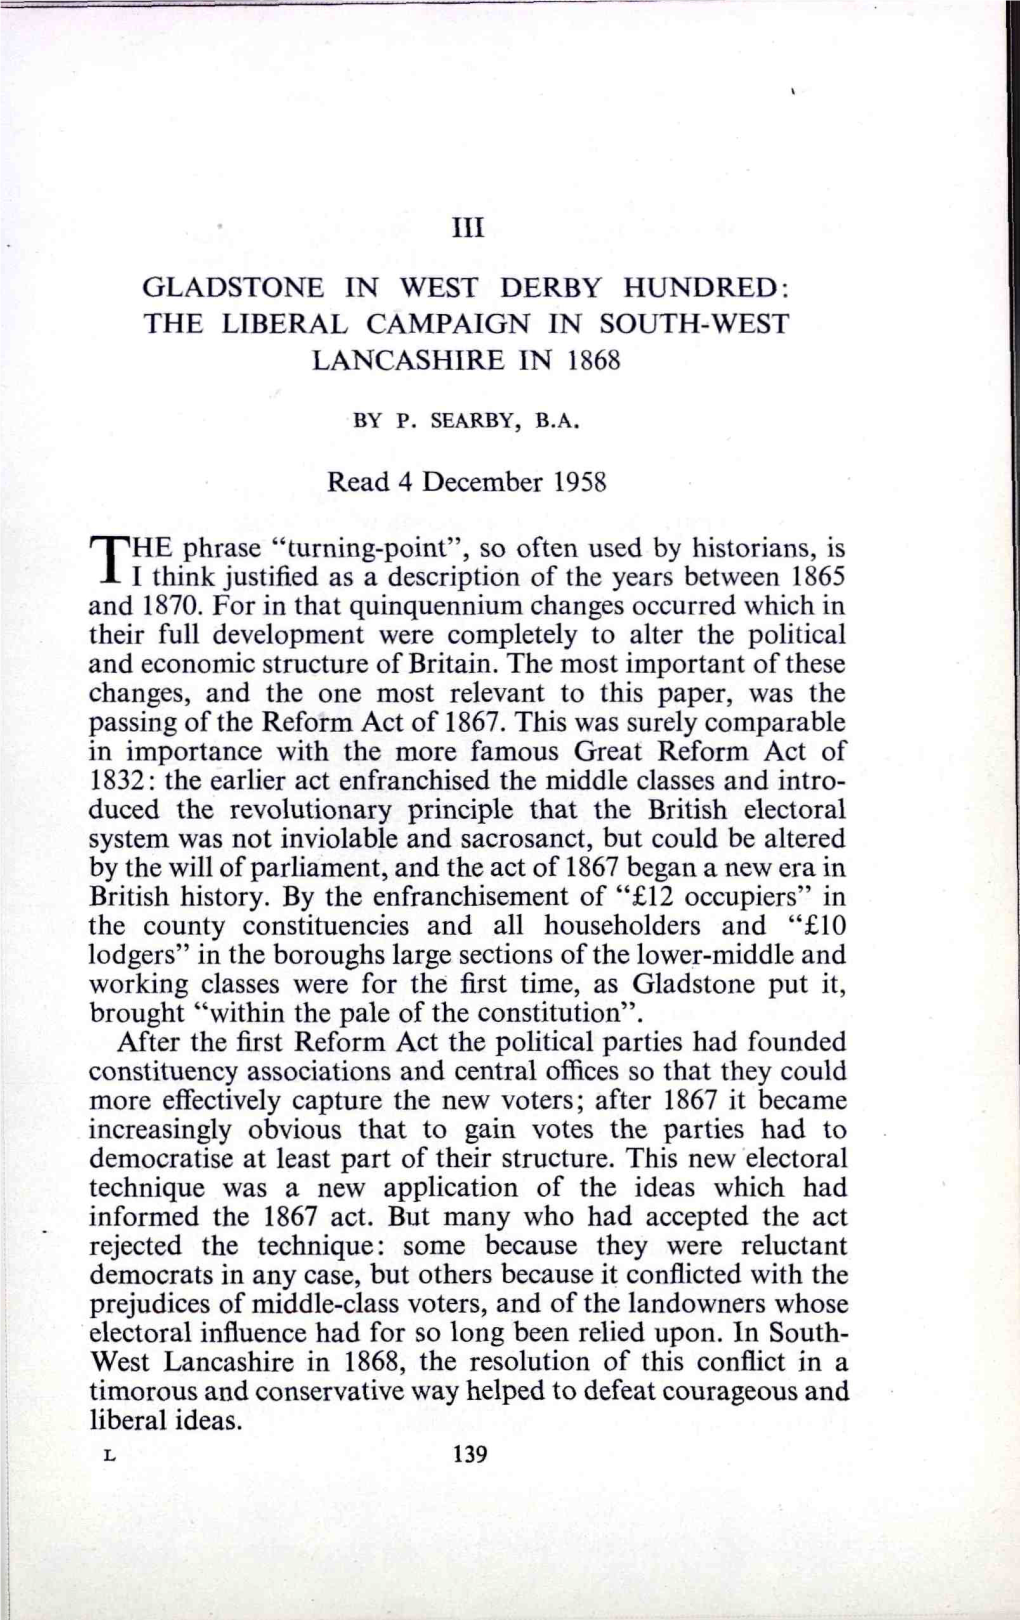 The Liberal Campaign in South-West Lancashire in 1868 ,.* by P